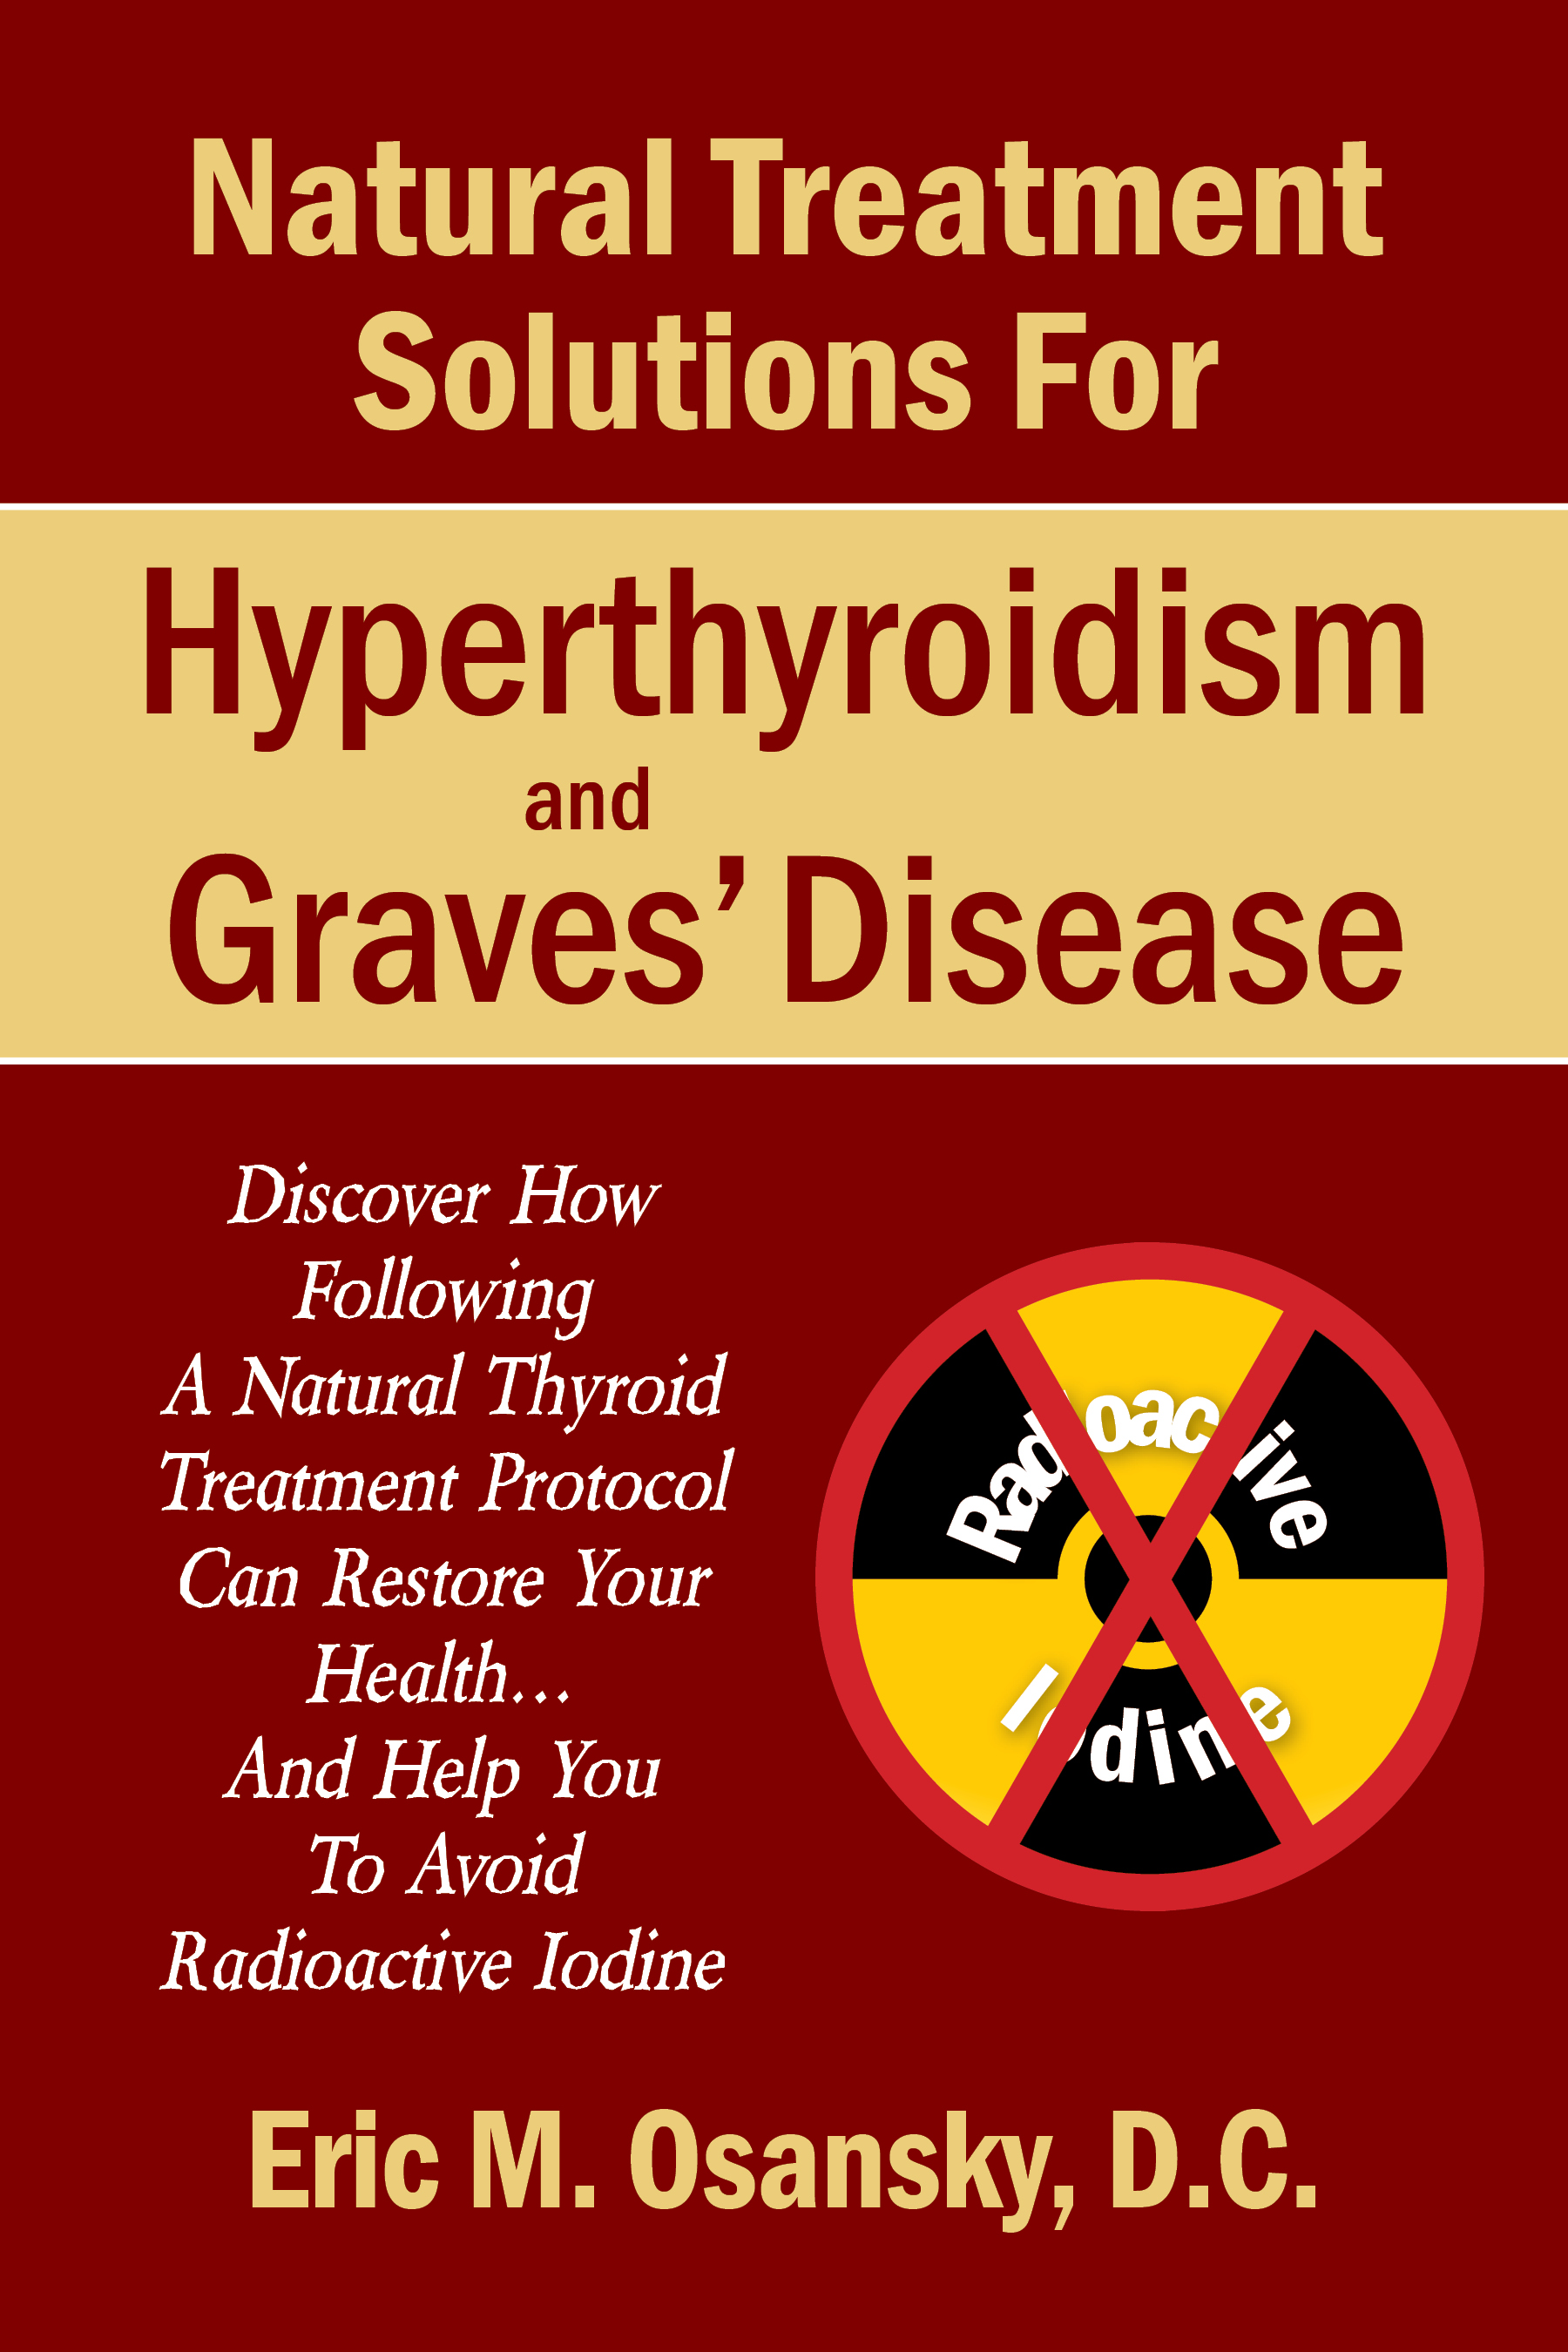 natural-treatment-solutions-for-hyperthyroidism-and-graves-disease